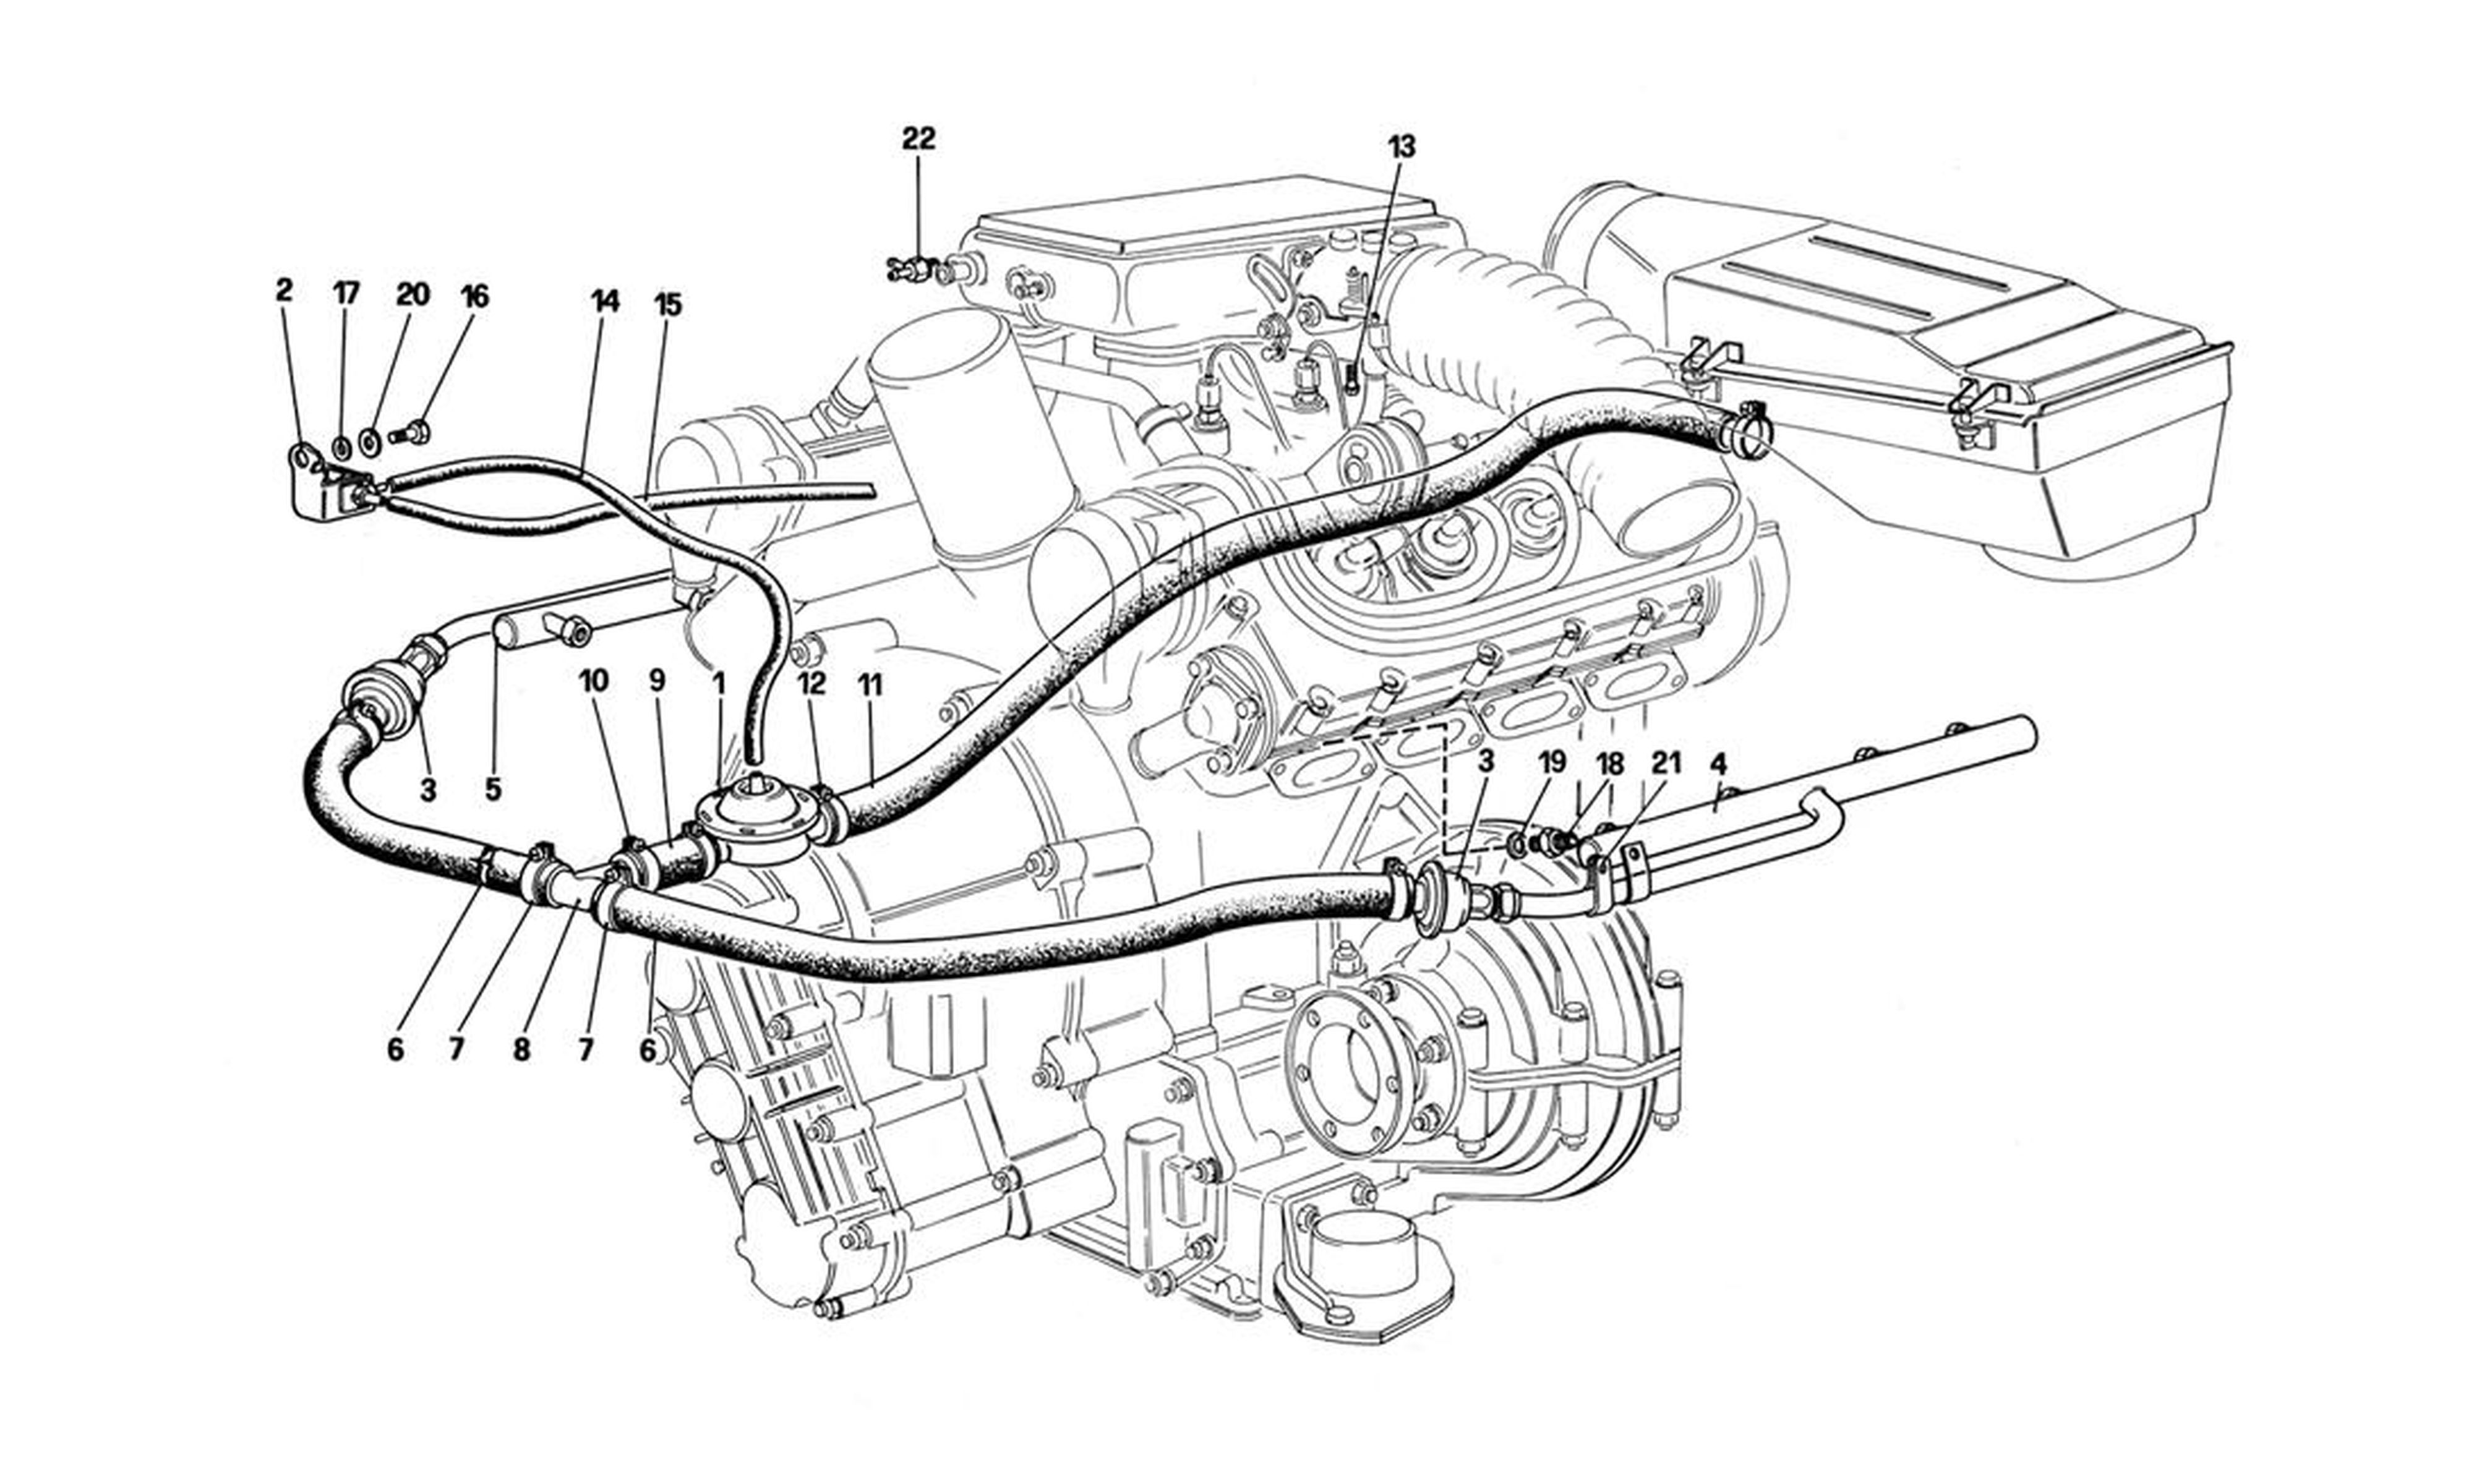 Schematic: Air Injection (For Us Version)